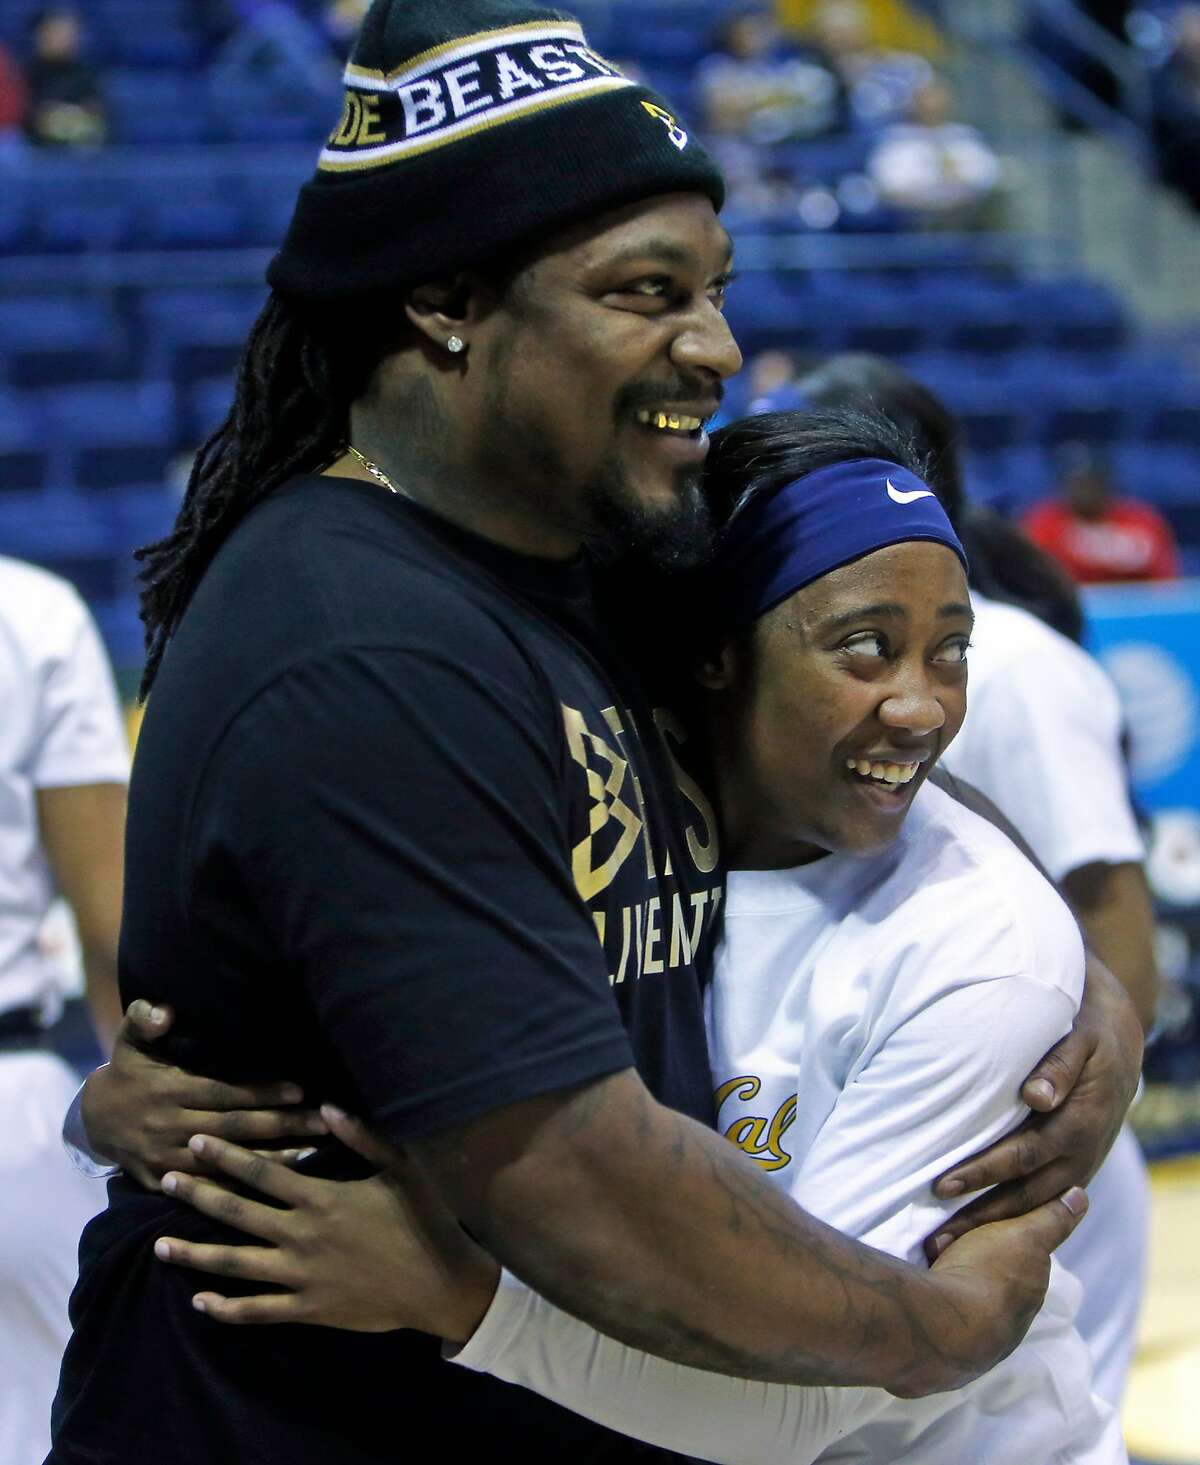 Marshawn Lynch hugs California's Asha Thomas before the Golden Bears played Stanford during PAC 12 women's basketball game at Haas Pavilion in Berkeley, Calif., on Thursday, February 16, 2017.